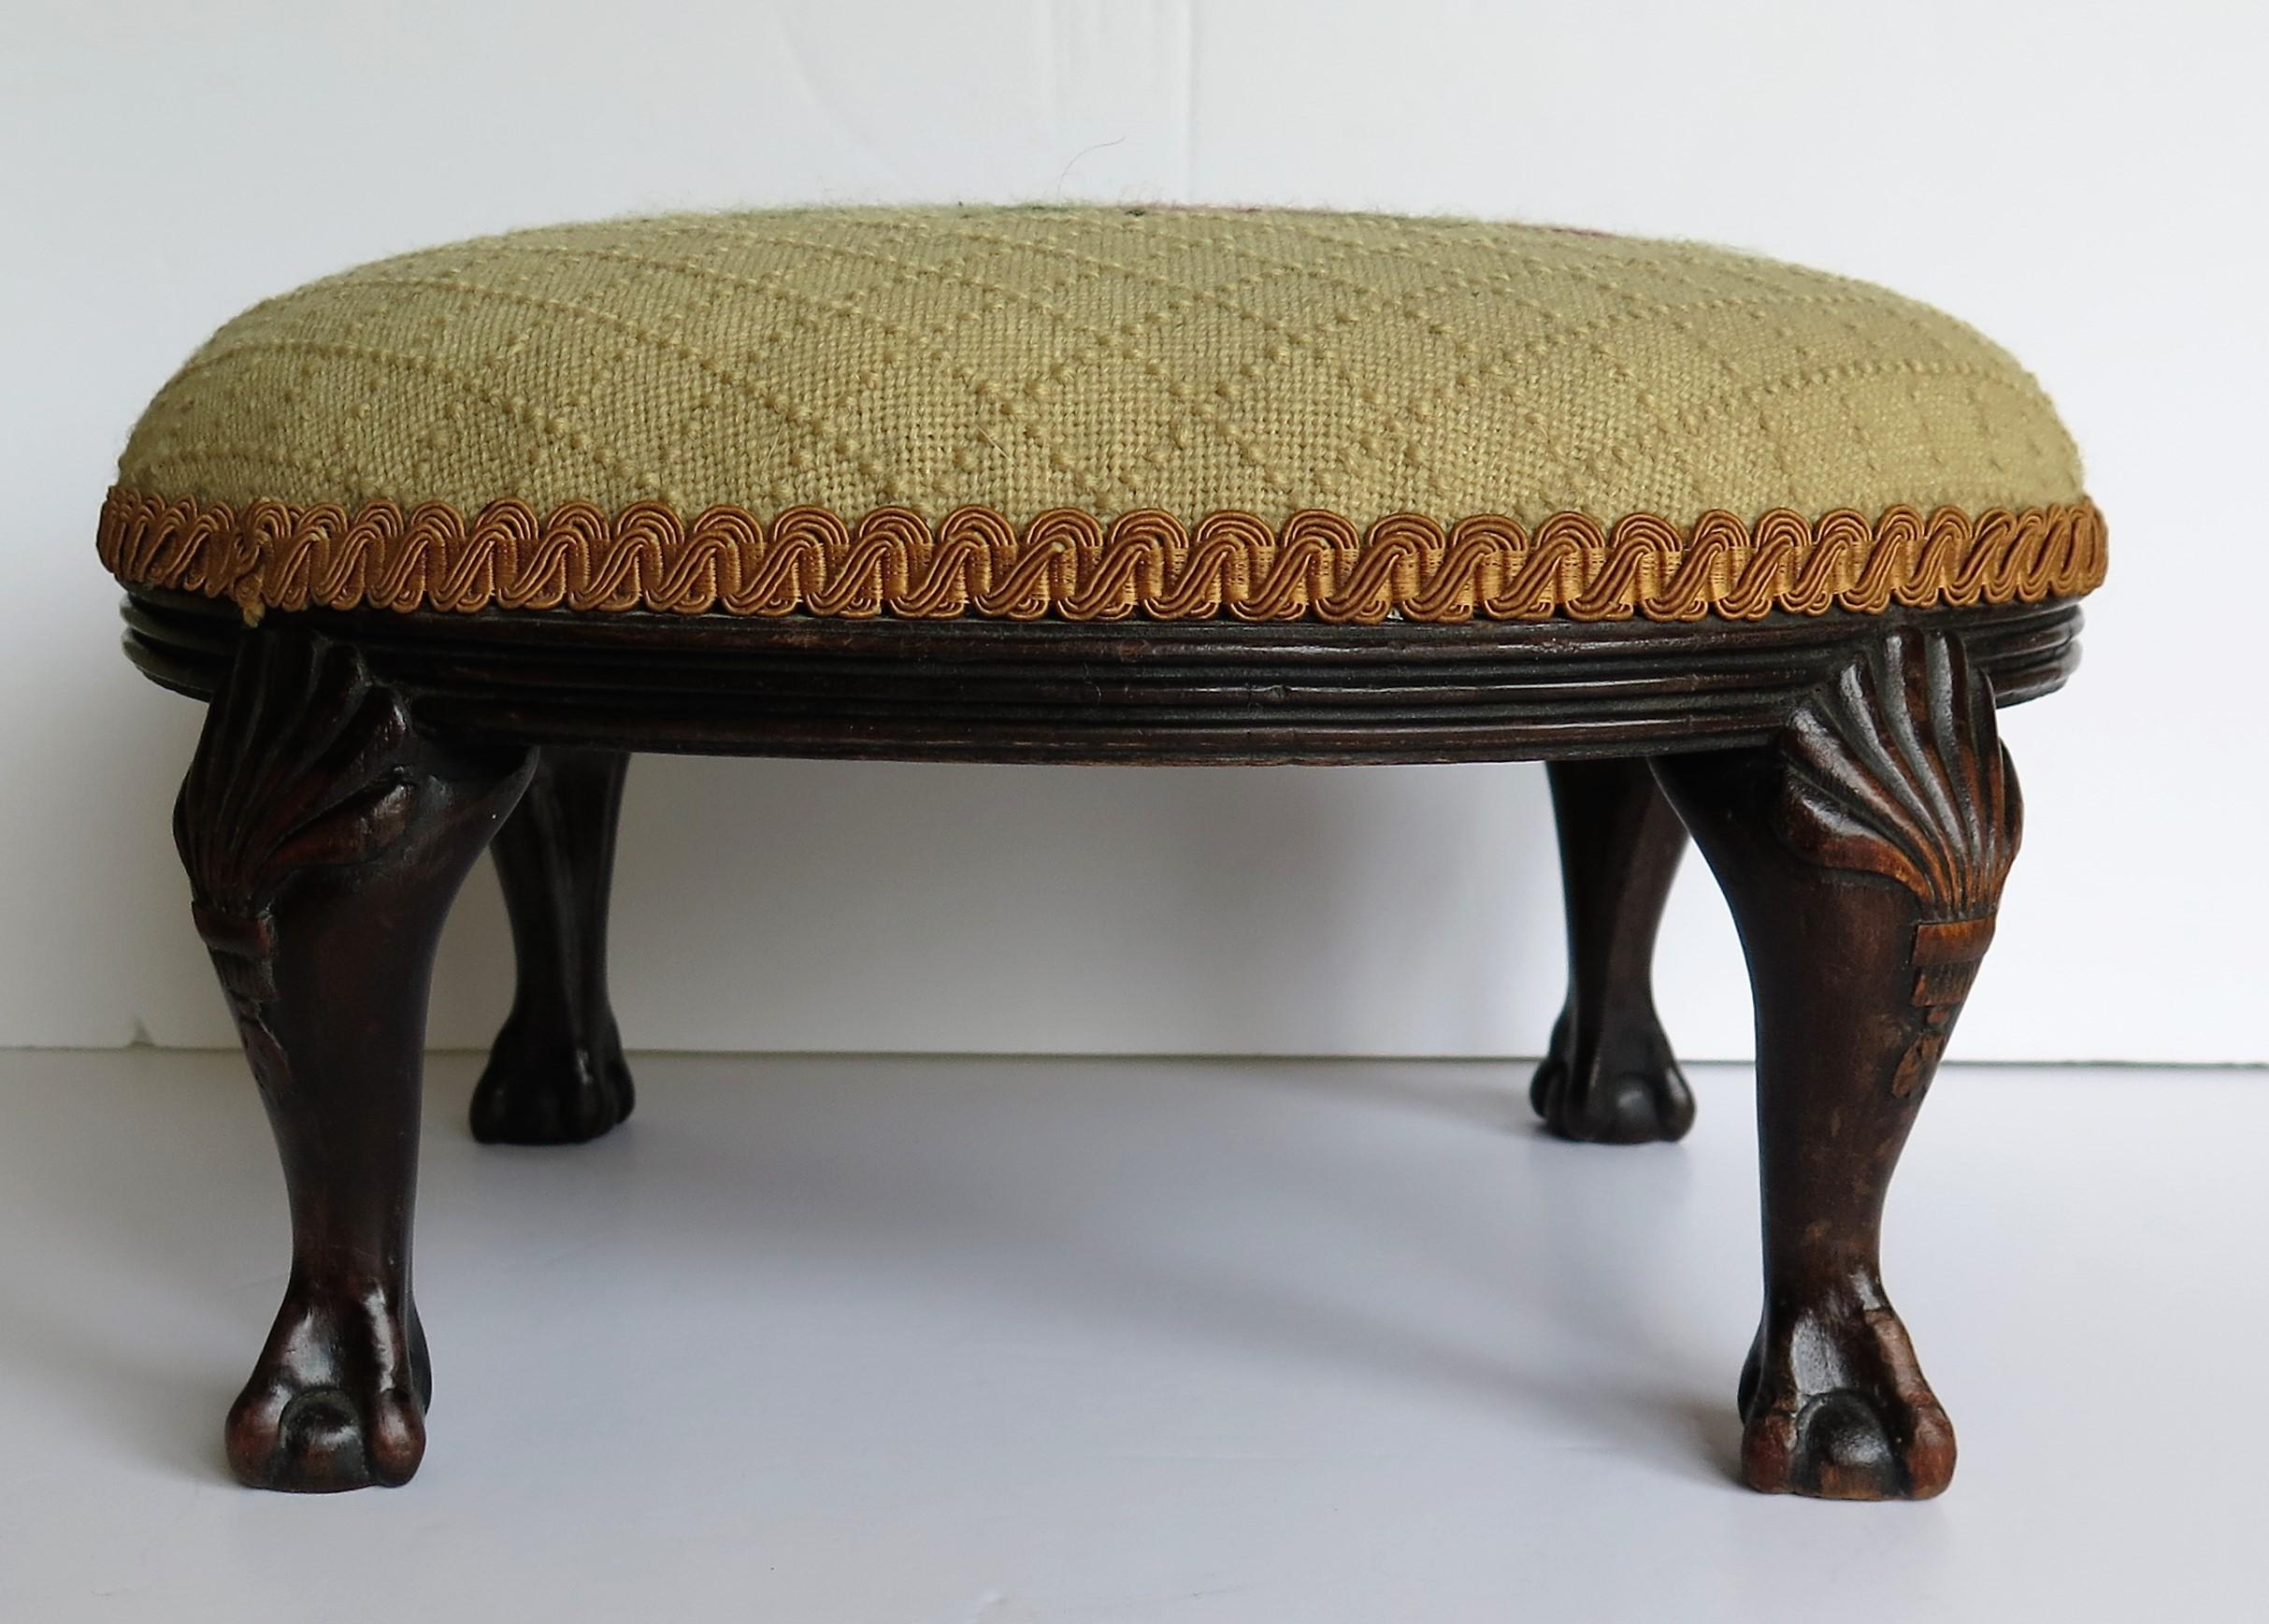 Late Georgian Footstool Carved Shell Ball and Claw Legs Needlework Top, Ca. 1820 5